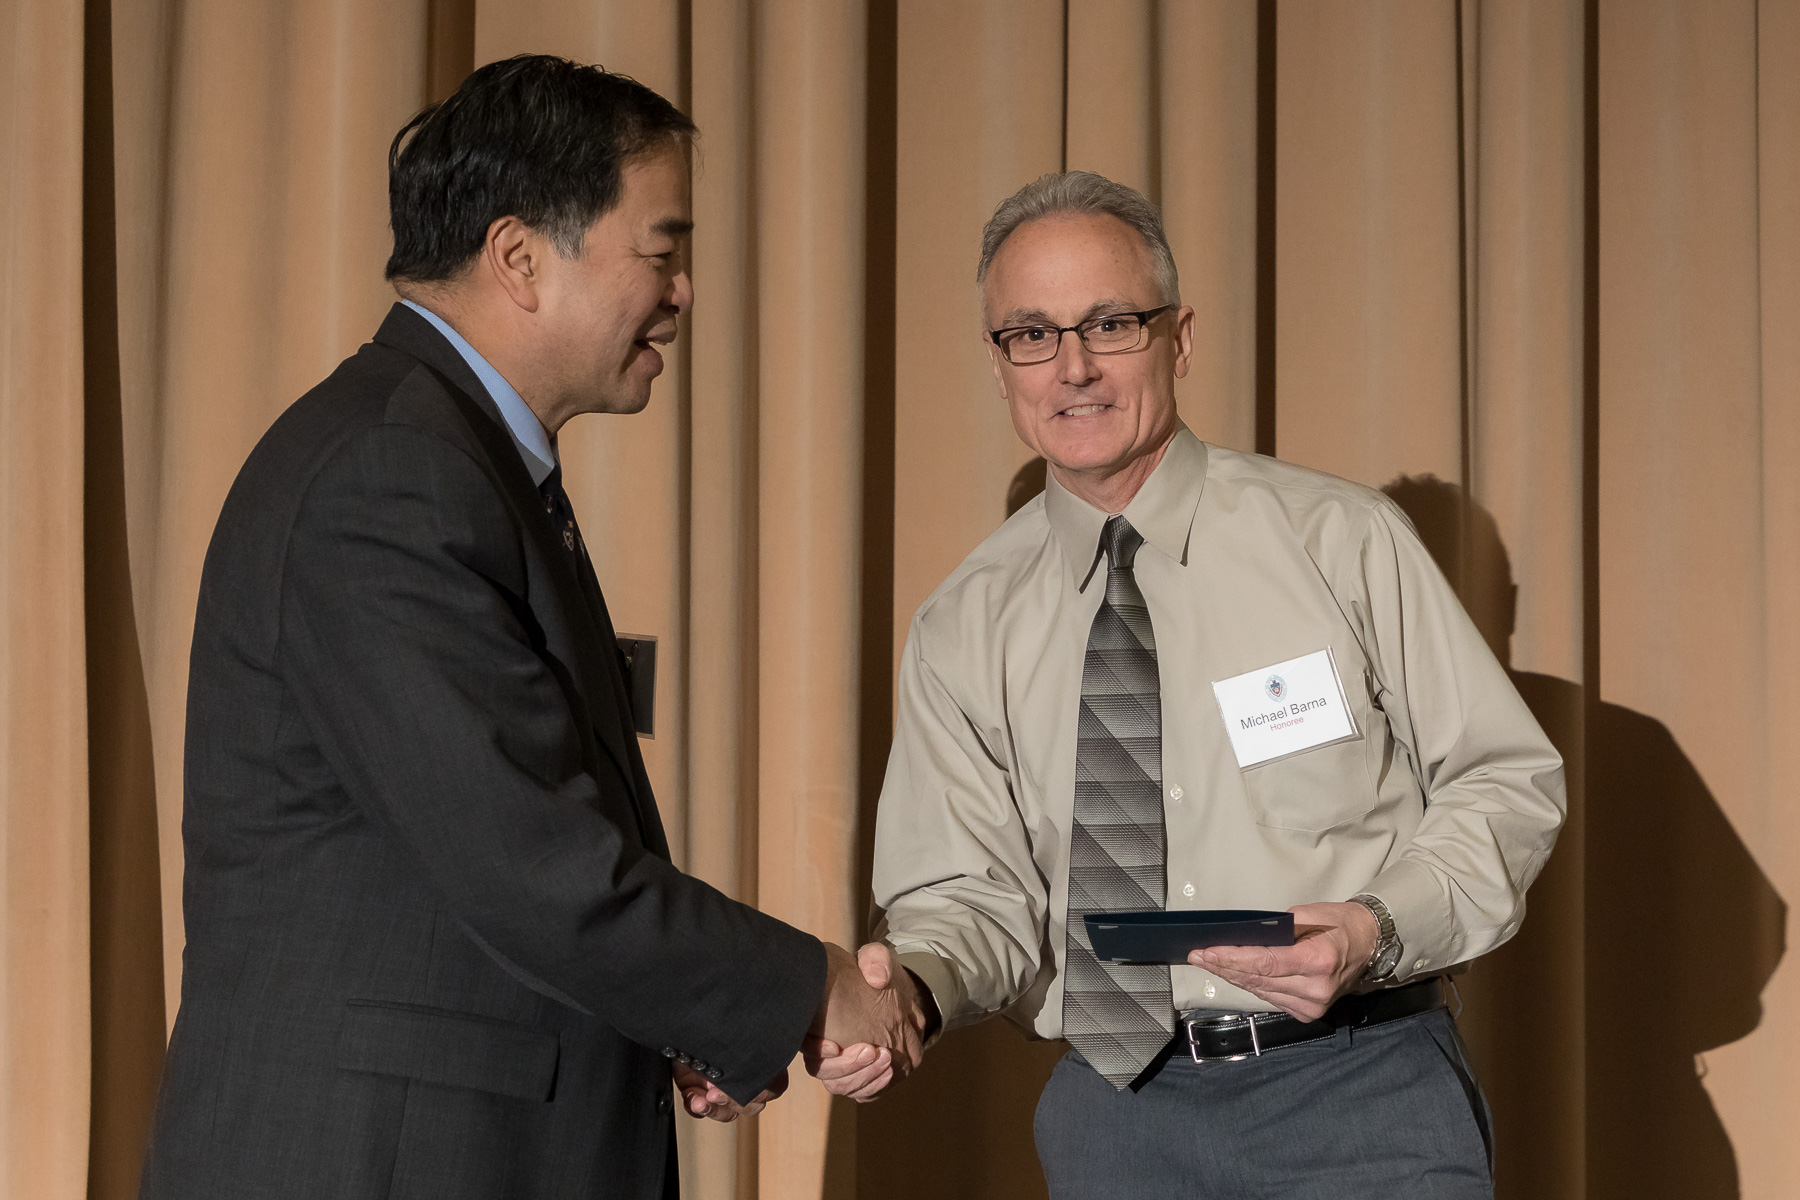 Michael Barna, right, with A. Gabriel Esteban, Ph.D., president, as faculty and staff members are inducted into DePaul University's 25 Year Club, Tuesday, Nov. 13, 2018, at the Lincoln Park Student Center. Employees celebrating their 25th work anniversary were honored at the luncheon with their colleagues and will have their names added to plaques located on the Loop and Lincoln Park Campuses. (DePaul University/Jeff Carrion)